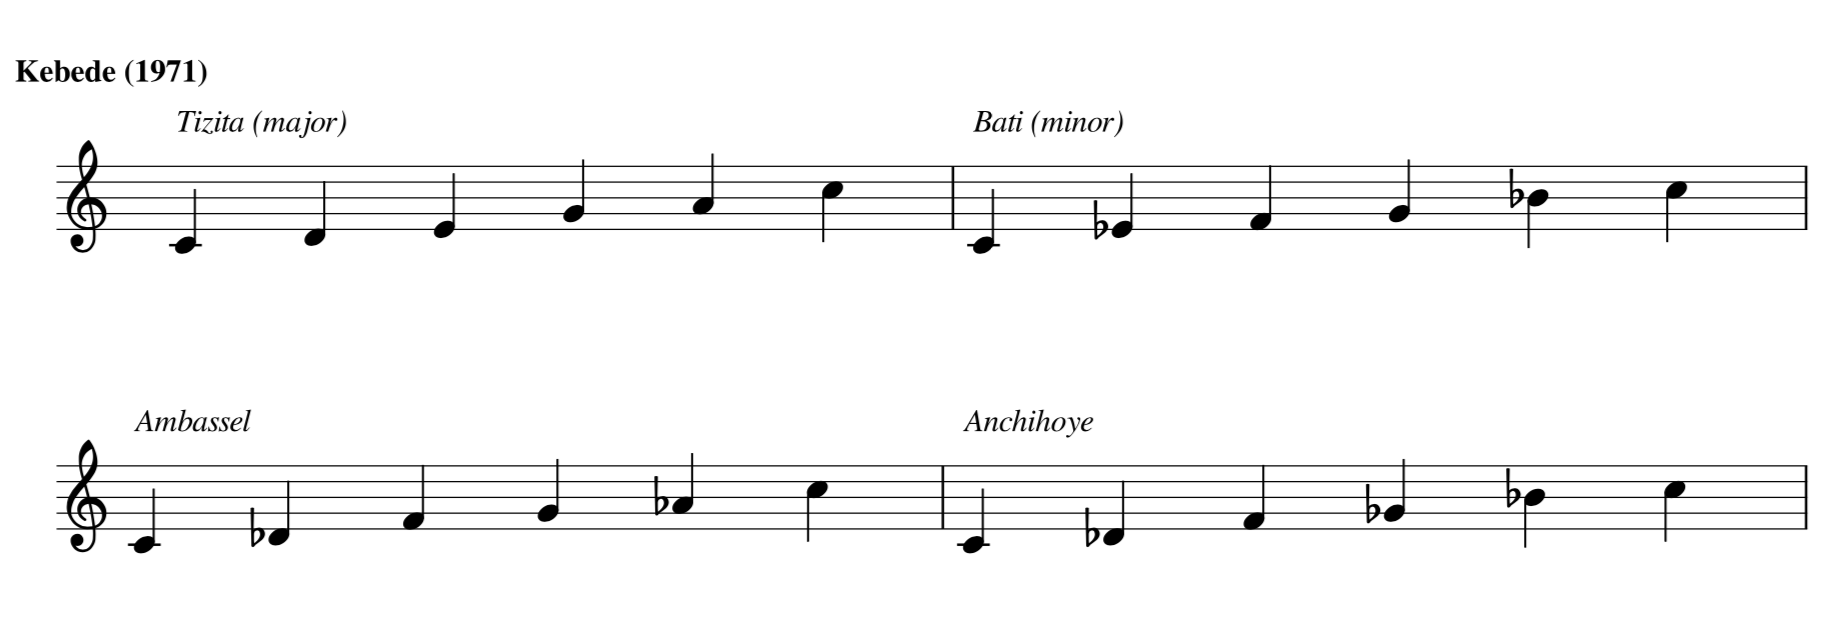 Four Ethiopian scales as notated by Ashenafi Kebede in 1971